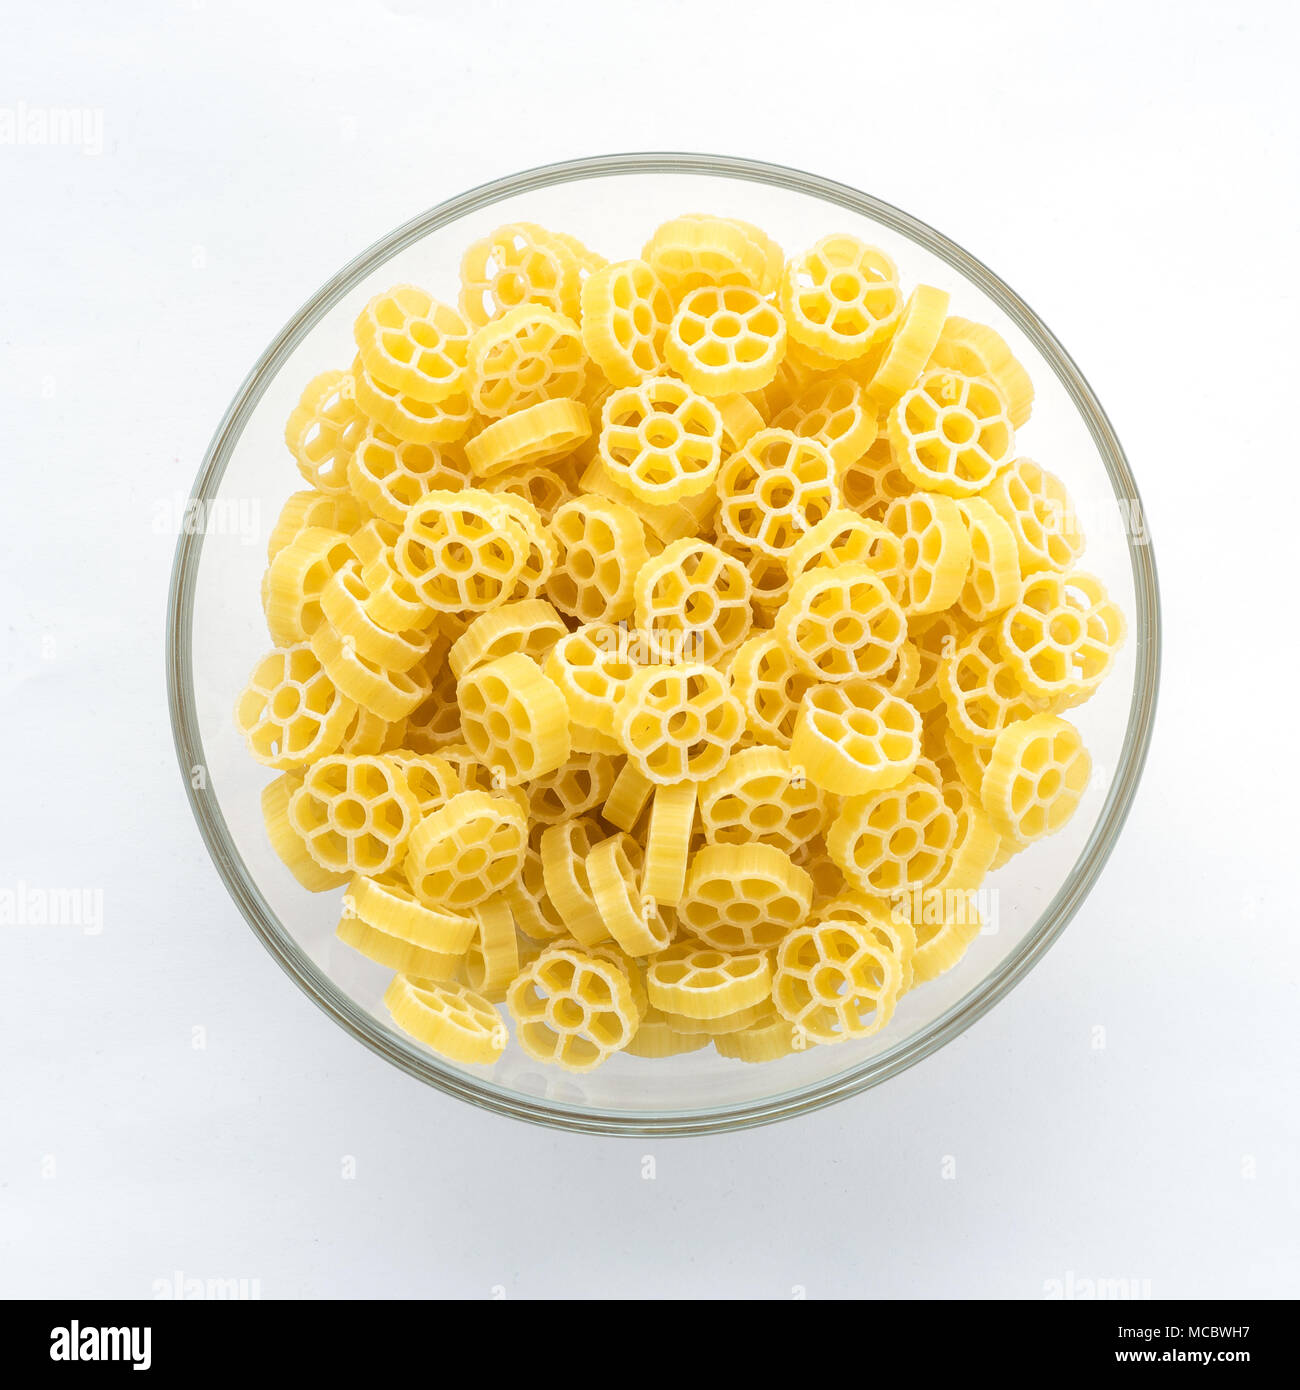 Macaroni ruote pasta in glass bowl on white isolated background, in the center close-up with top. Stock Photo